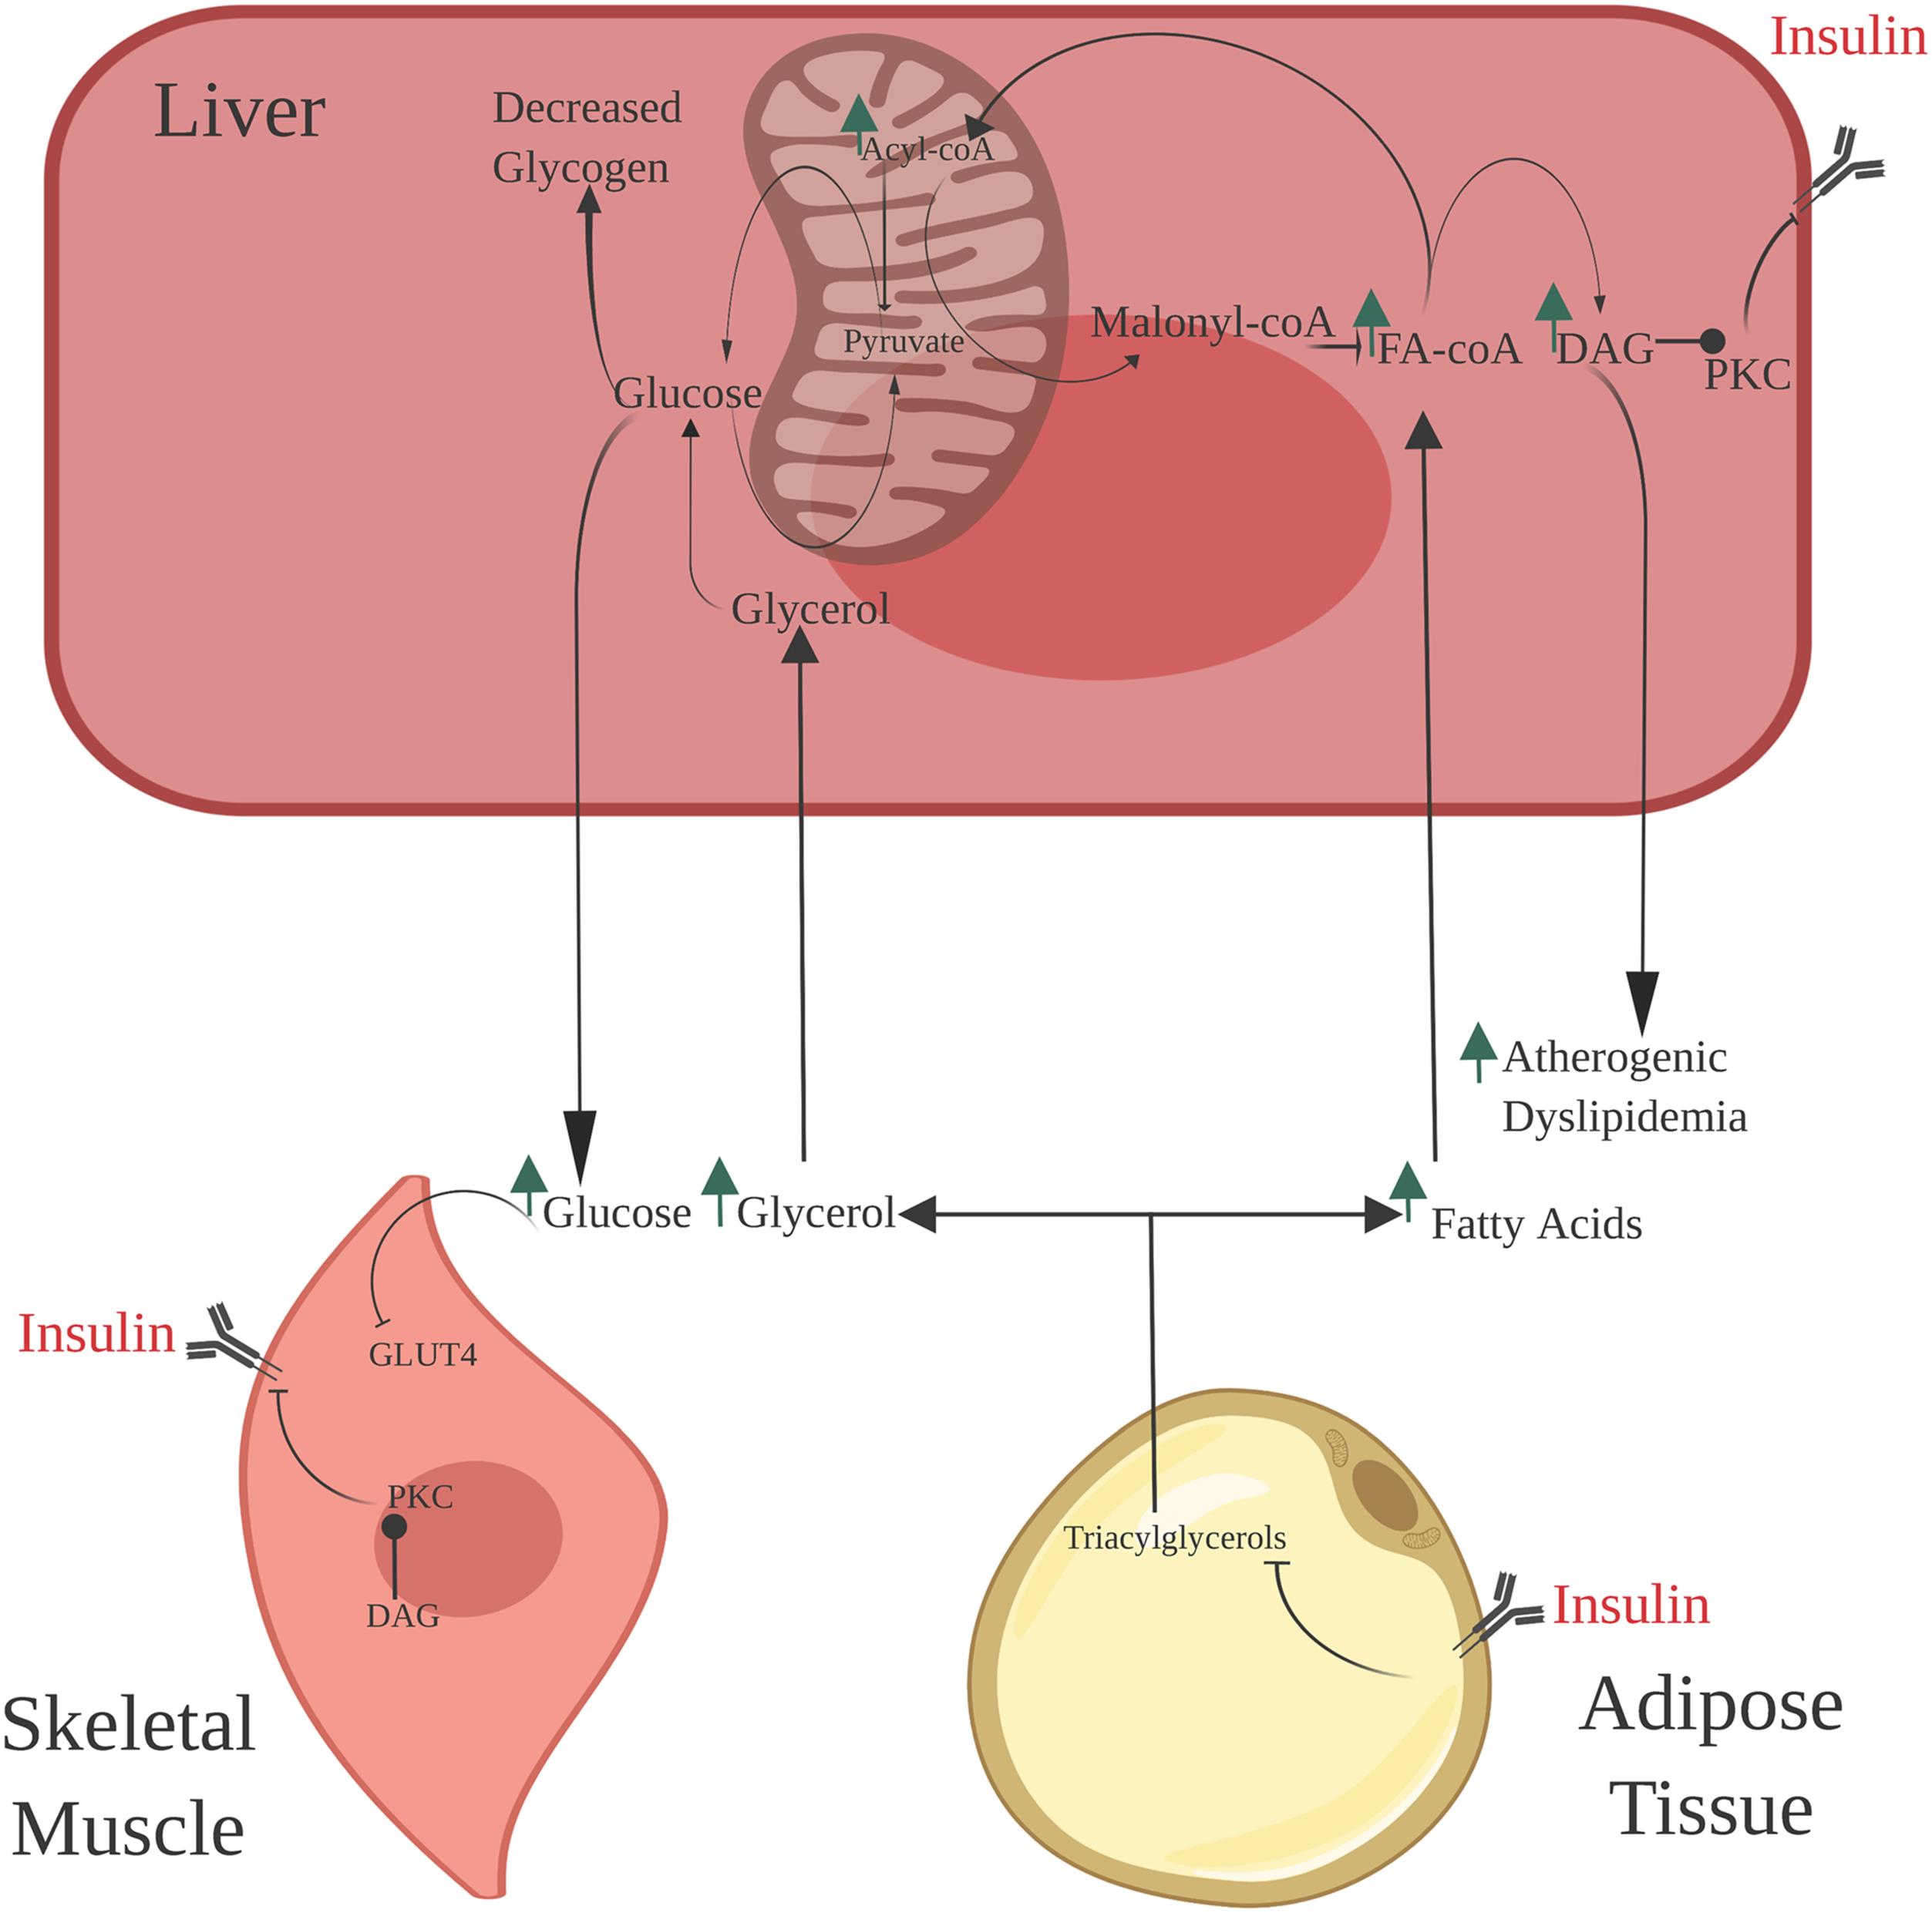 Mechanism of insulin resistance in skeletal muscle, liver and adipose tissue.